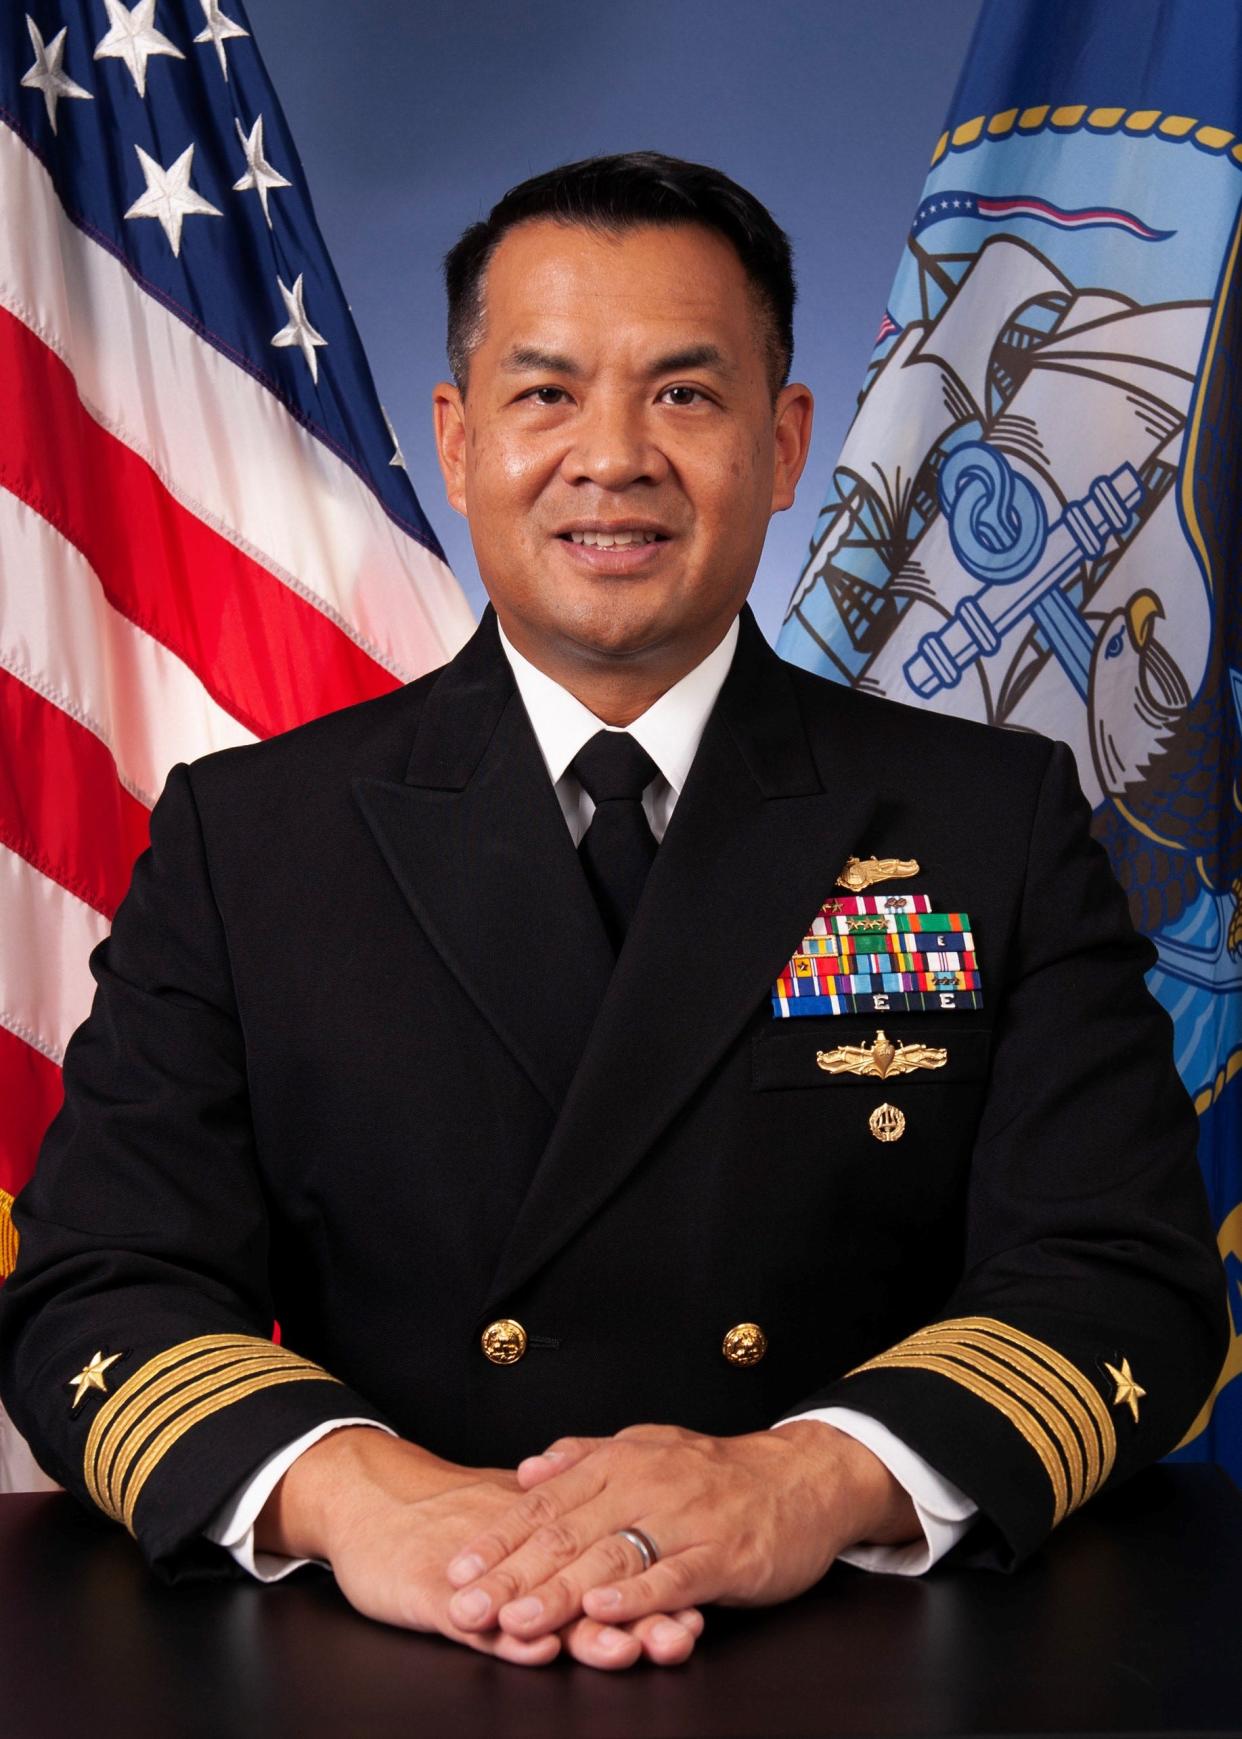 Vincent Tionquiao, a Bremerton native and Olympic High graduate, is recently selected and confirmed for promotion to rear admiral (lower half). His new assignment as a flag officer will be the deputy director at the C4/Cyber Systems, J-6 Joint Staff in Washington D.C.